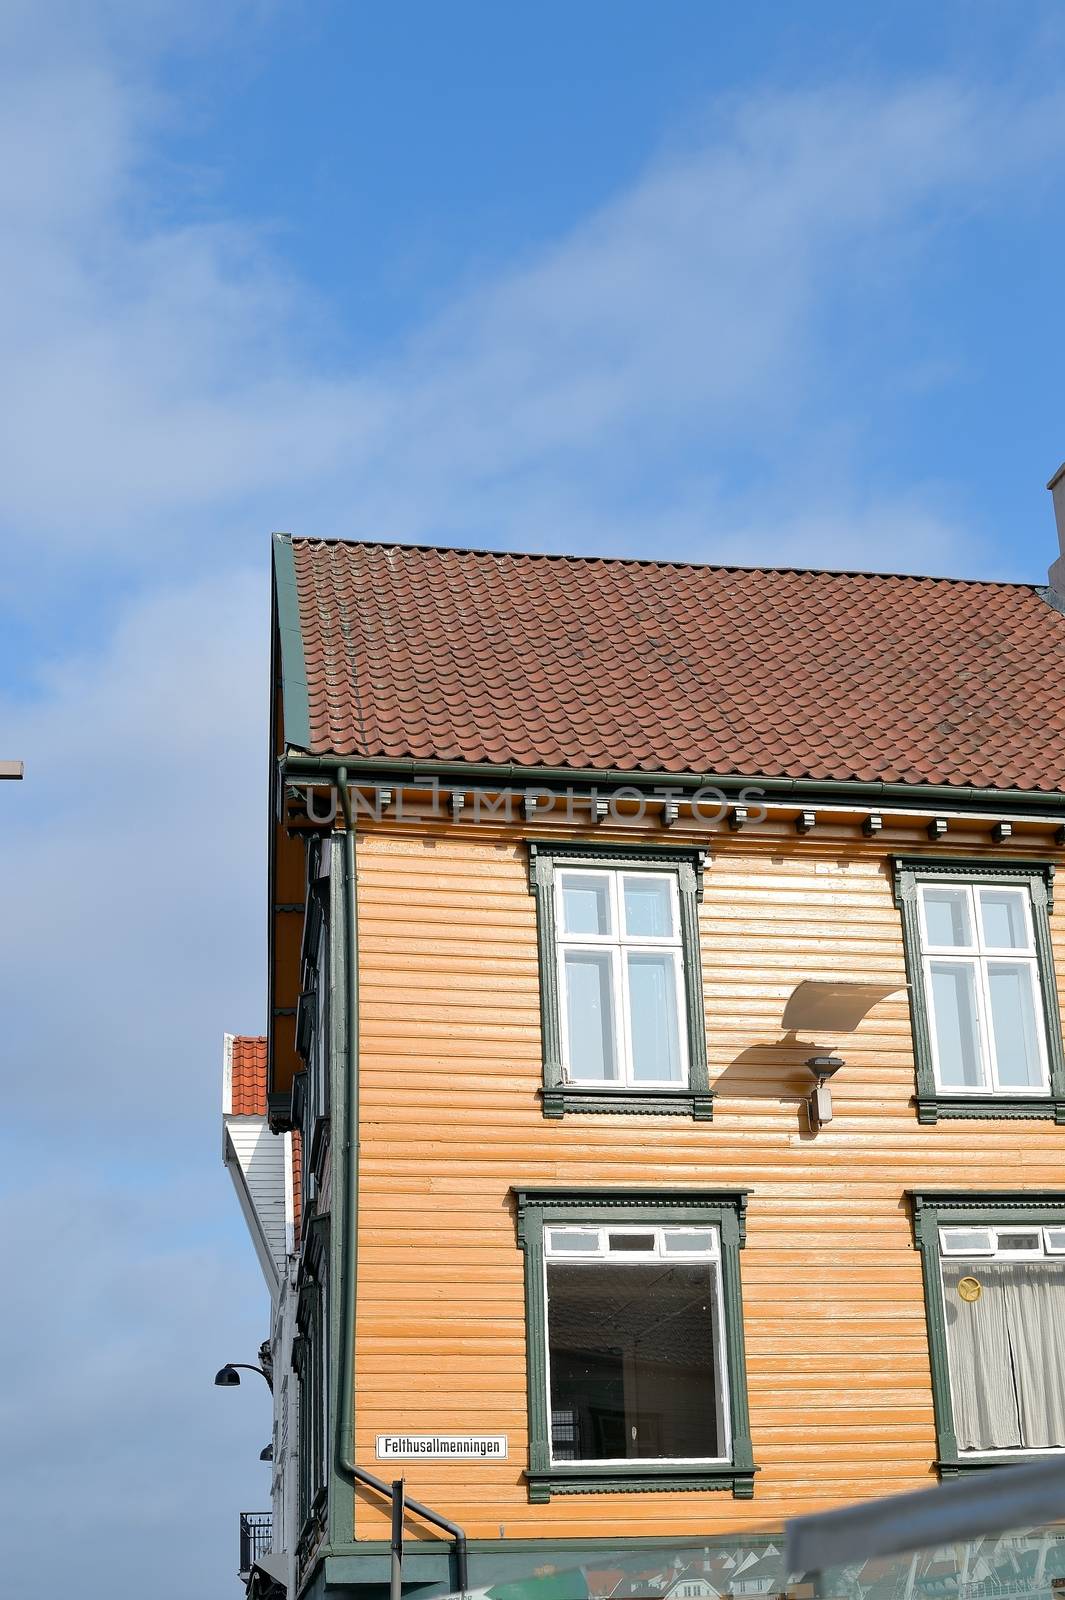 Typical Norwegian Wooden Building Stavanger Norway With a Tiled  by Whiteboxmedia